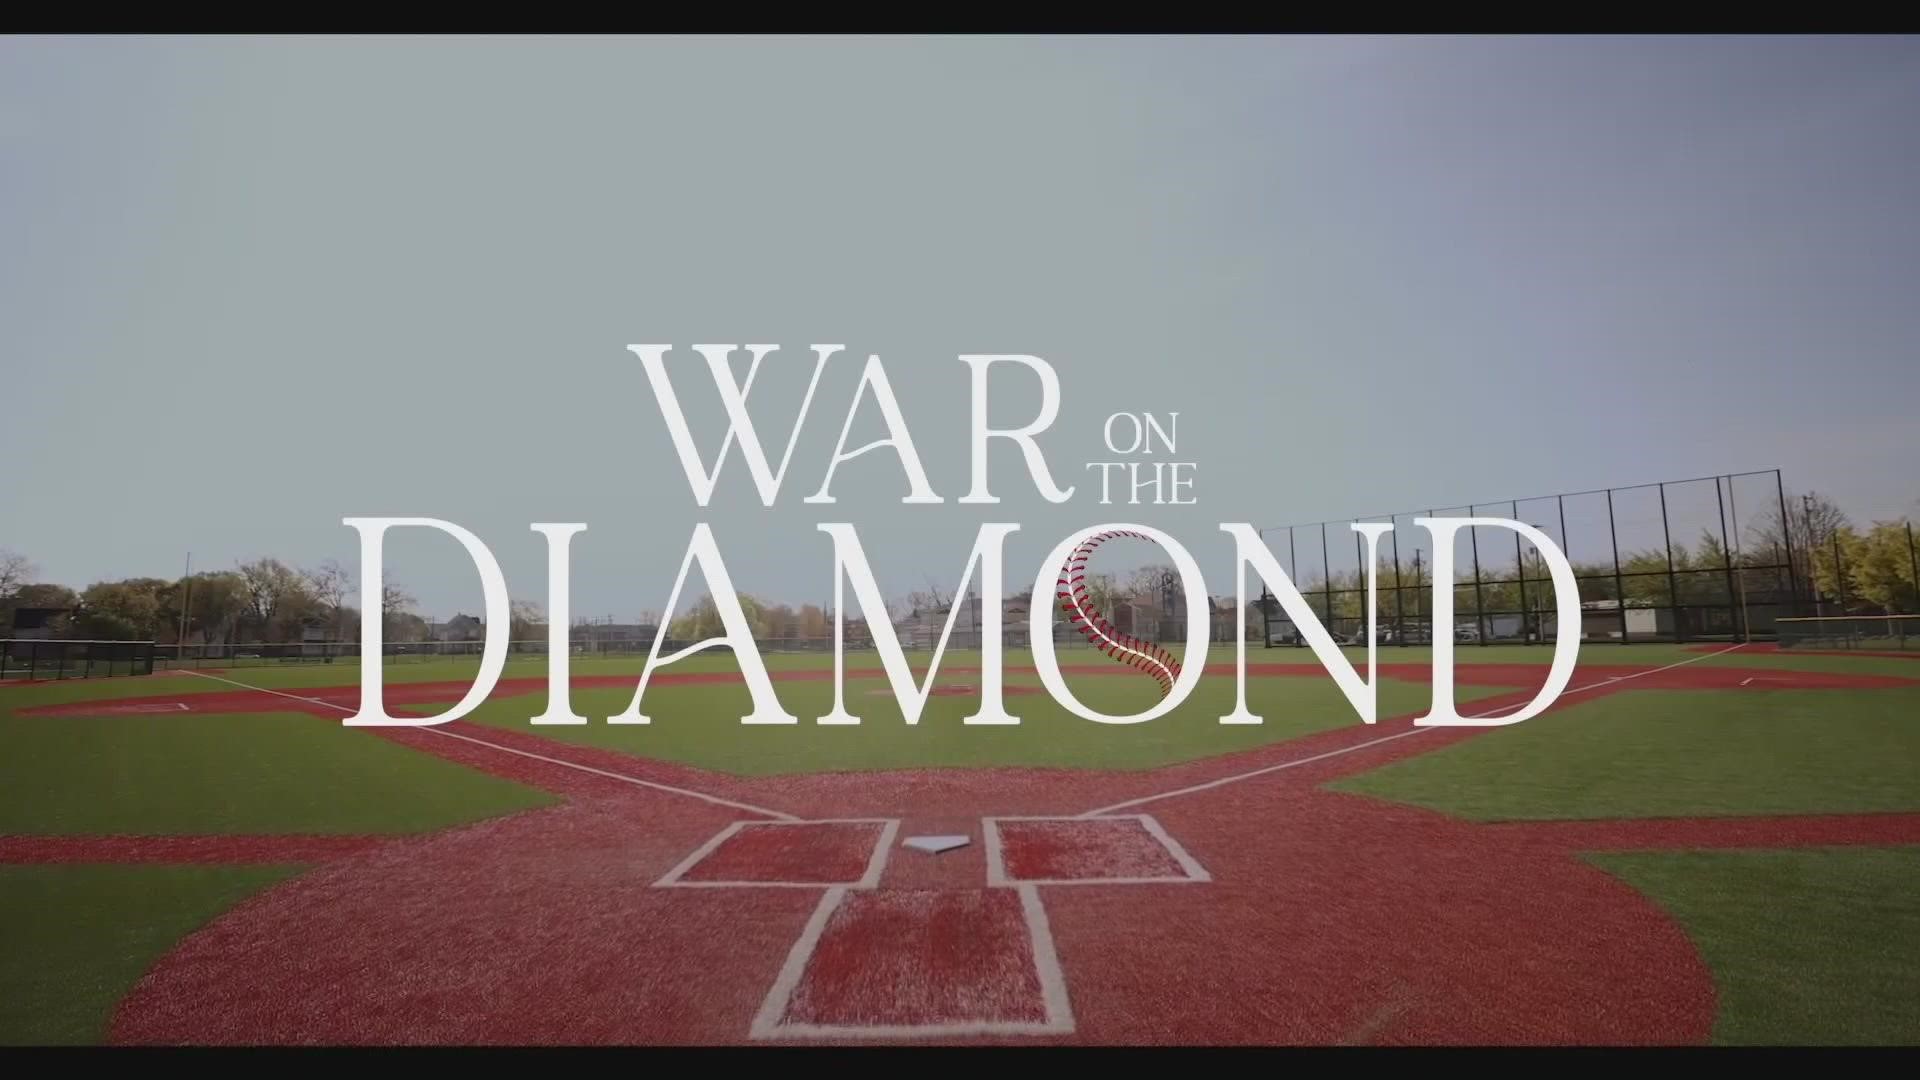 'War on the Diamond' documents the heated rivalry that was ignited by one pitch in 1920.